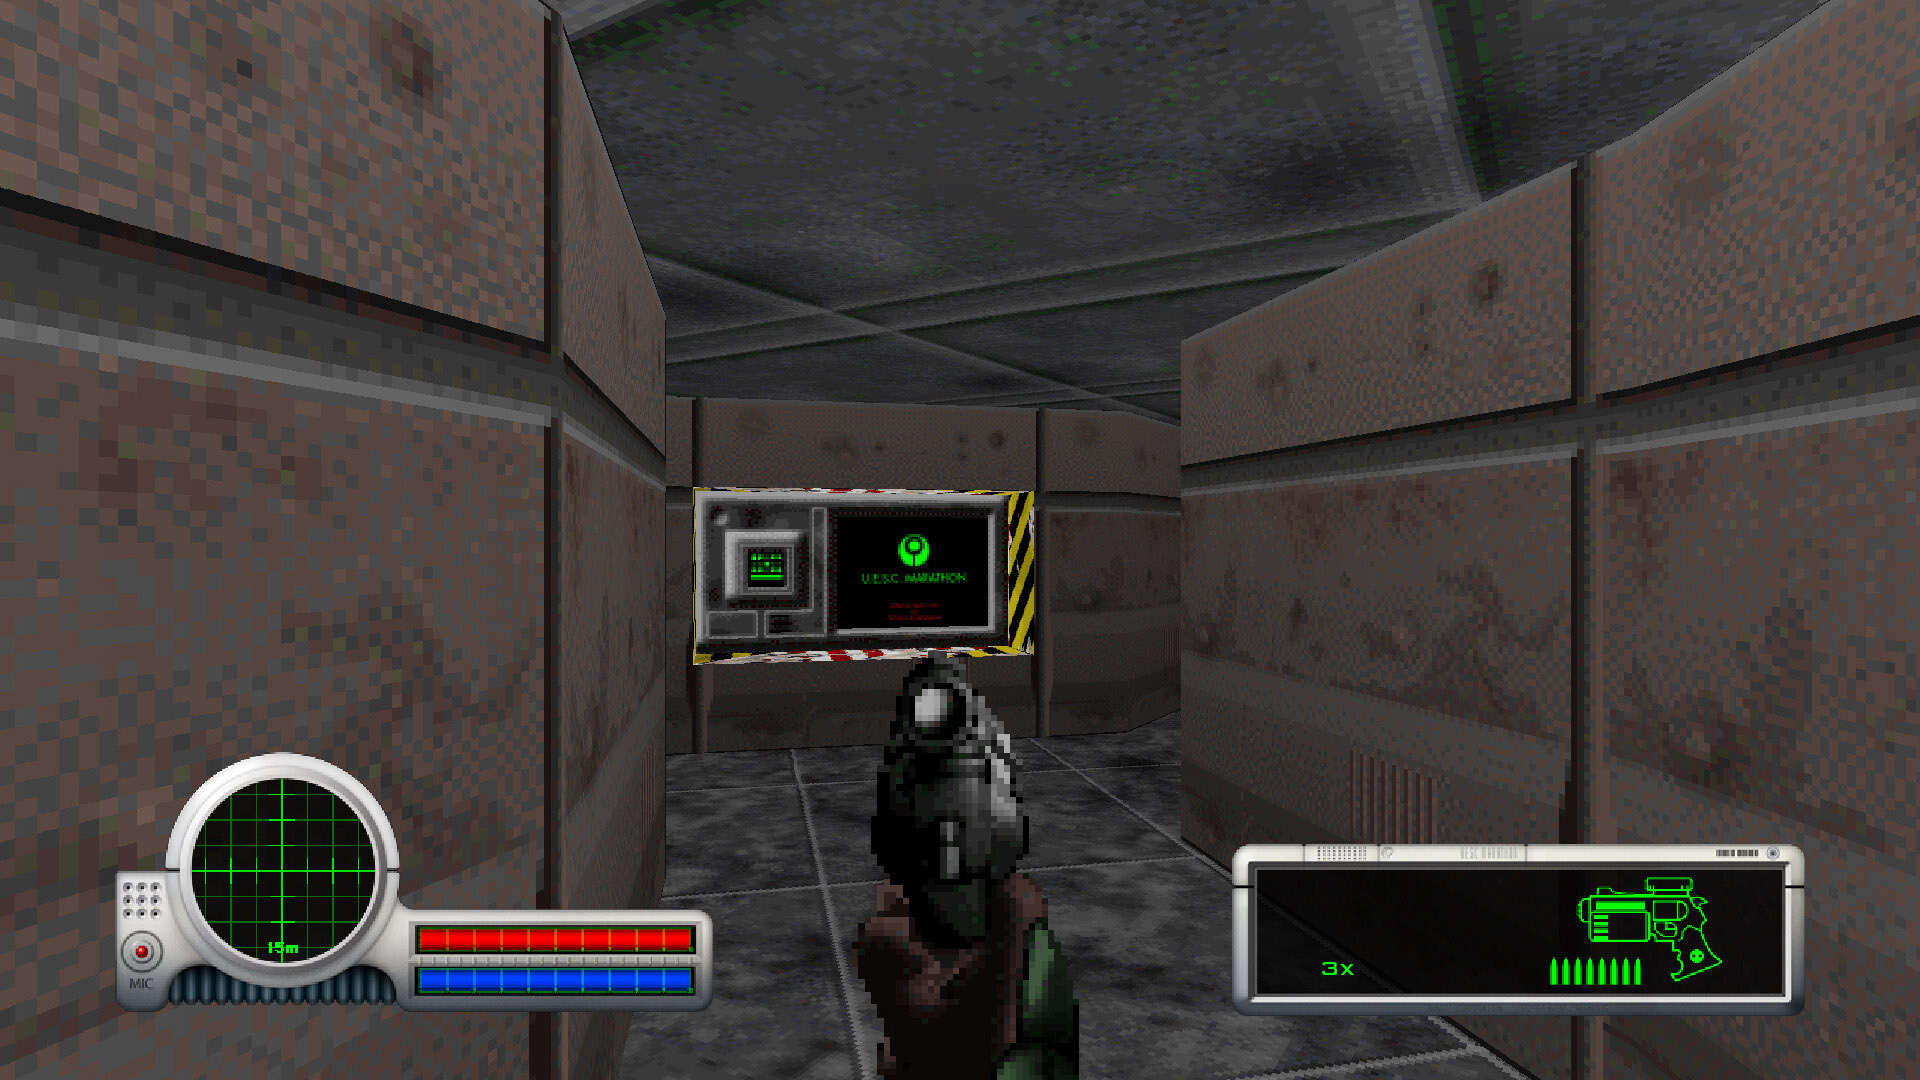 Classic '90s Halo precursor FPS launches on Steam for free